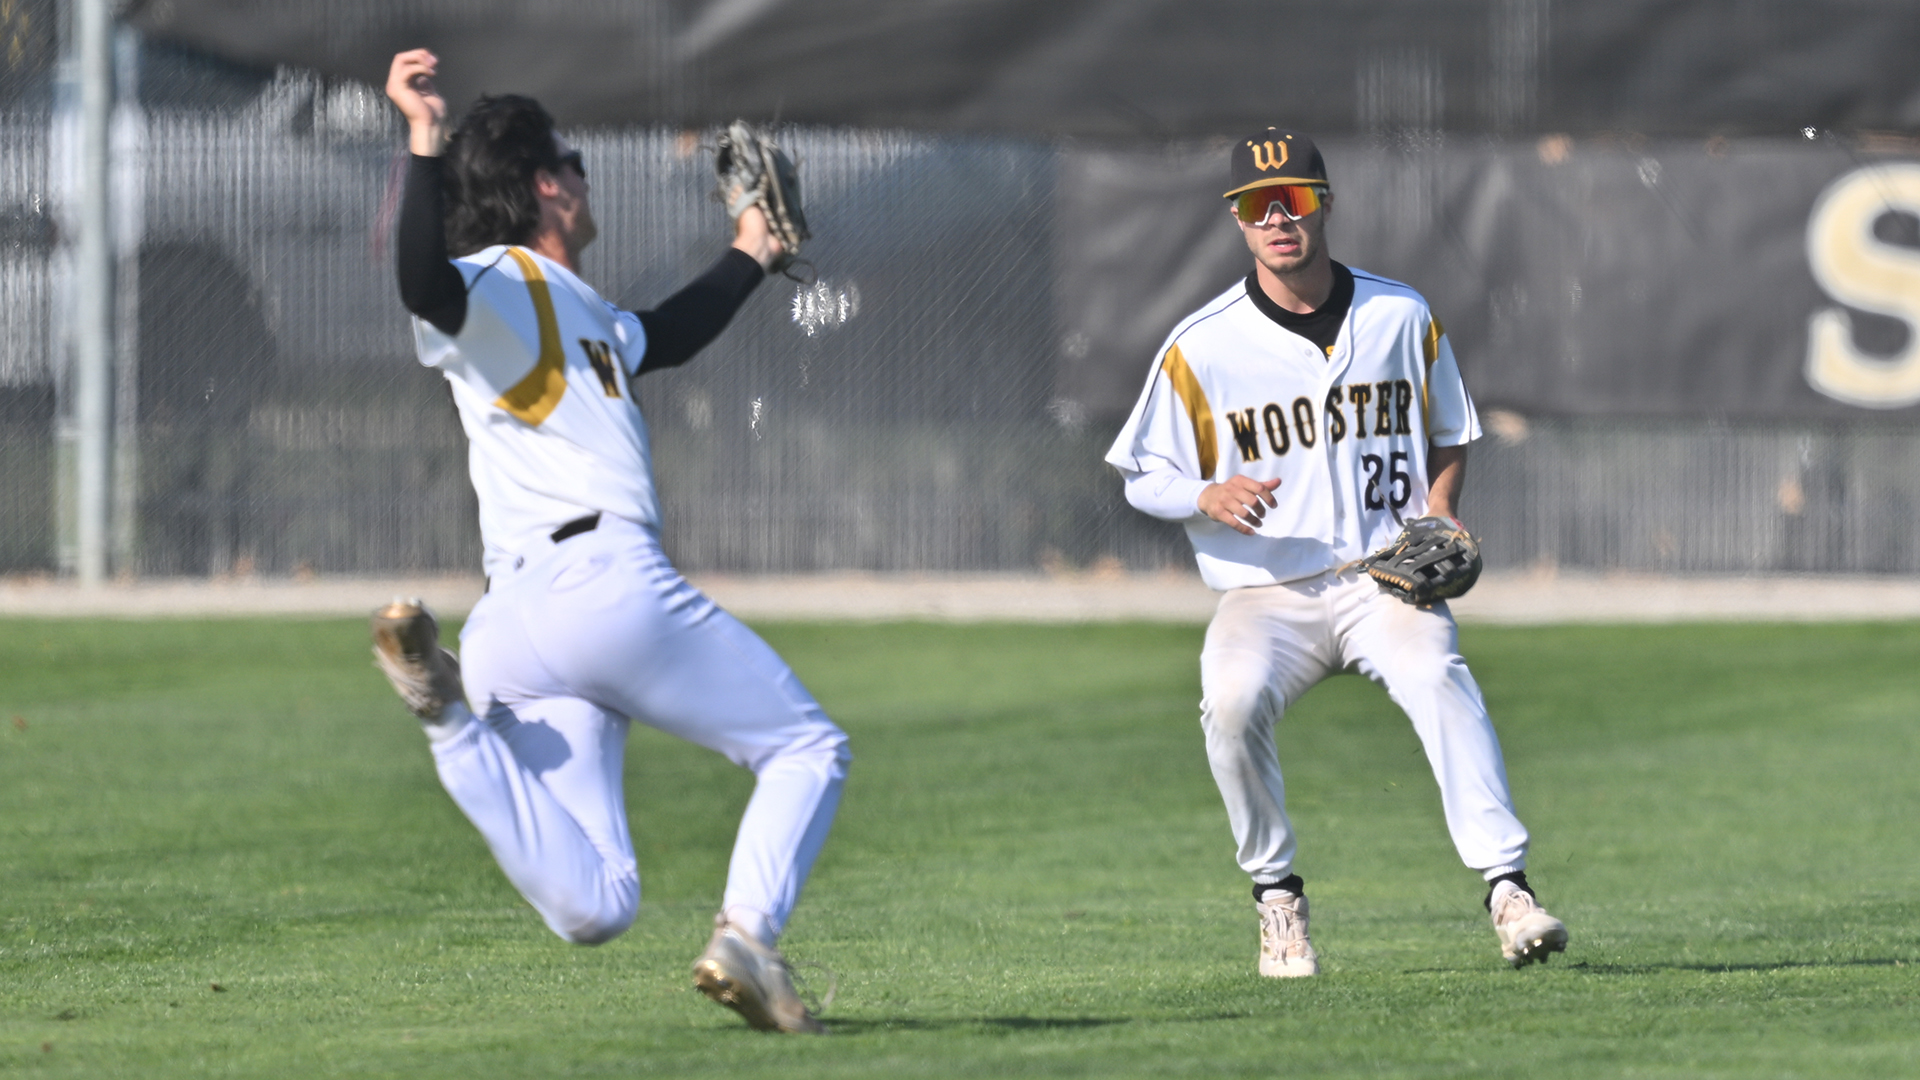 Grant Mitchell, Wooster baseball